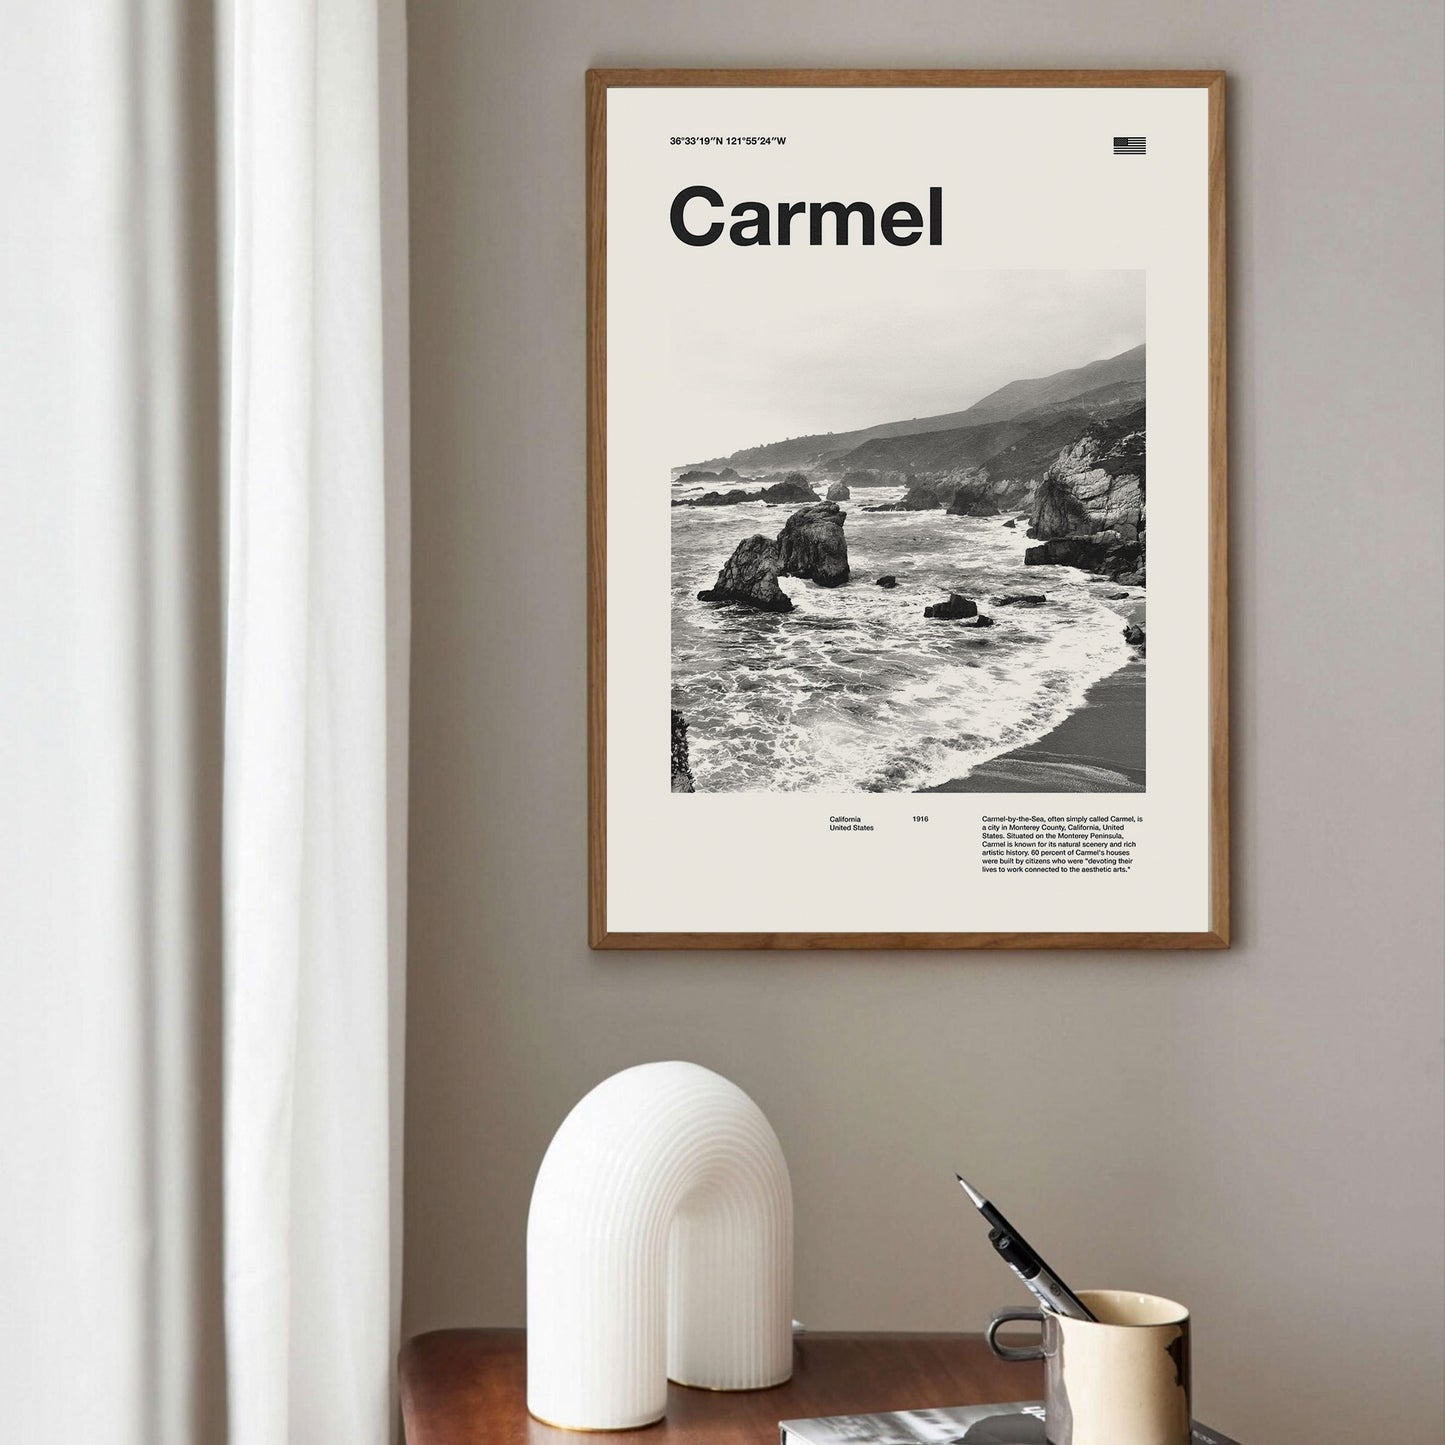 A Carmel by the sea art print poster from thewallflowerclub.